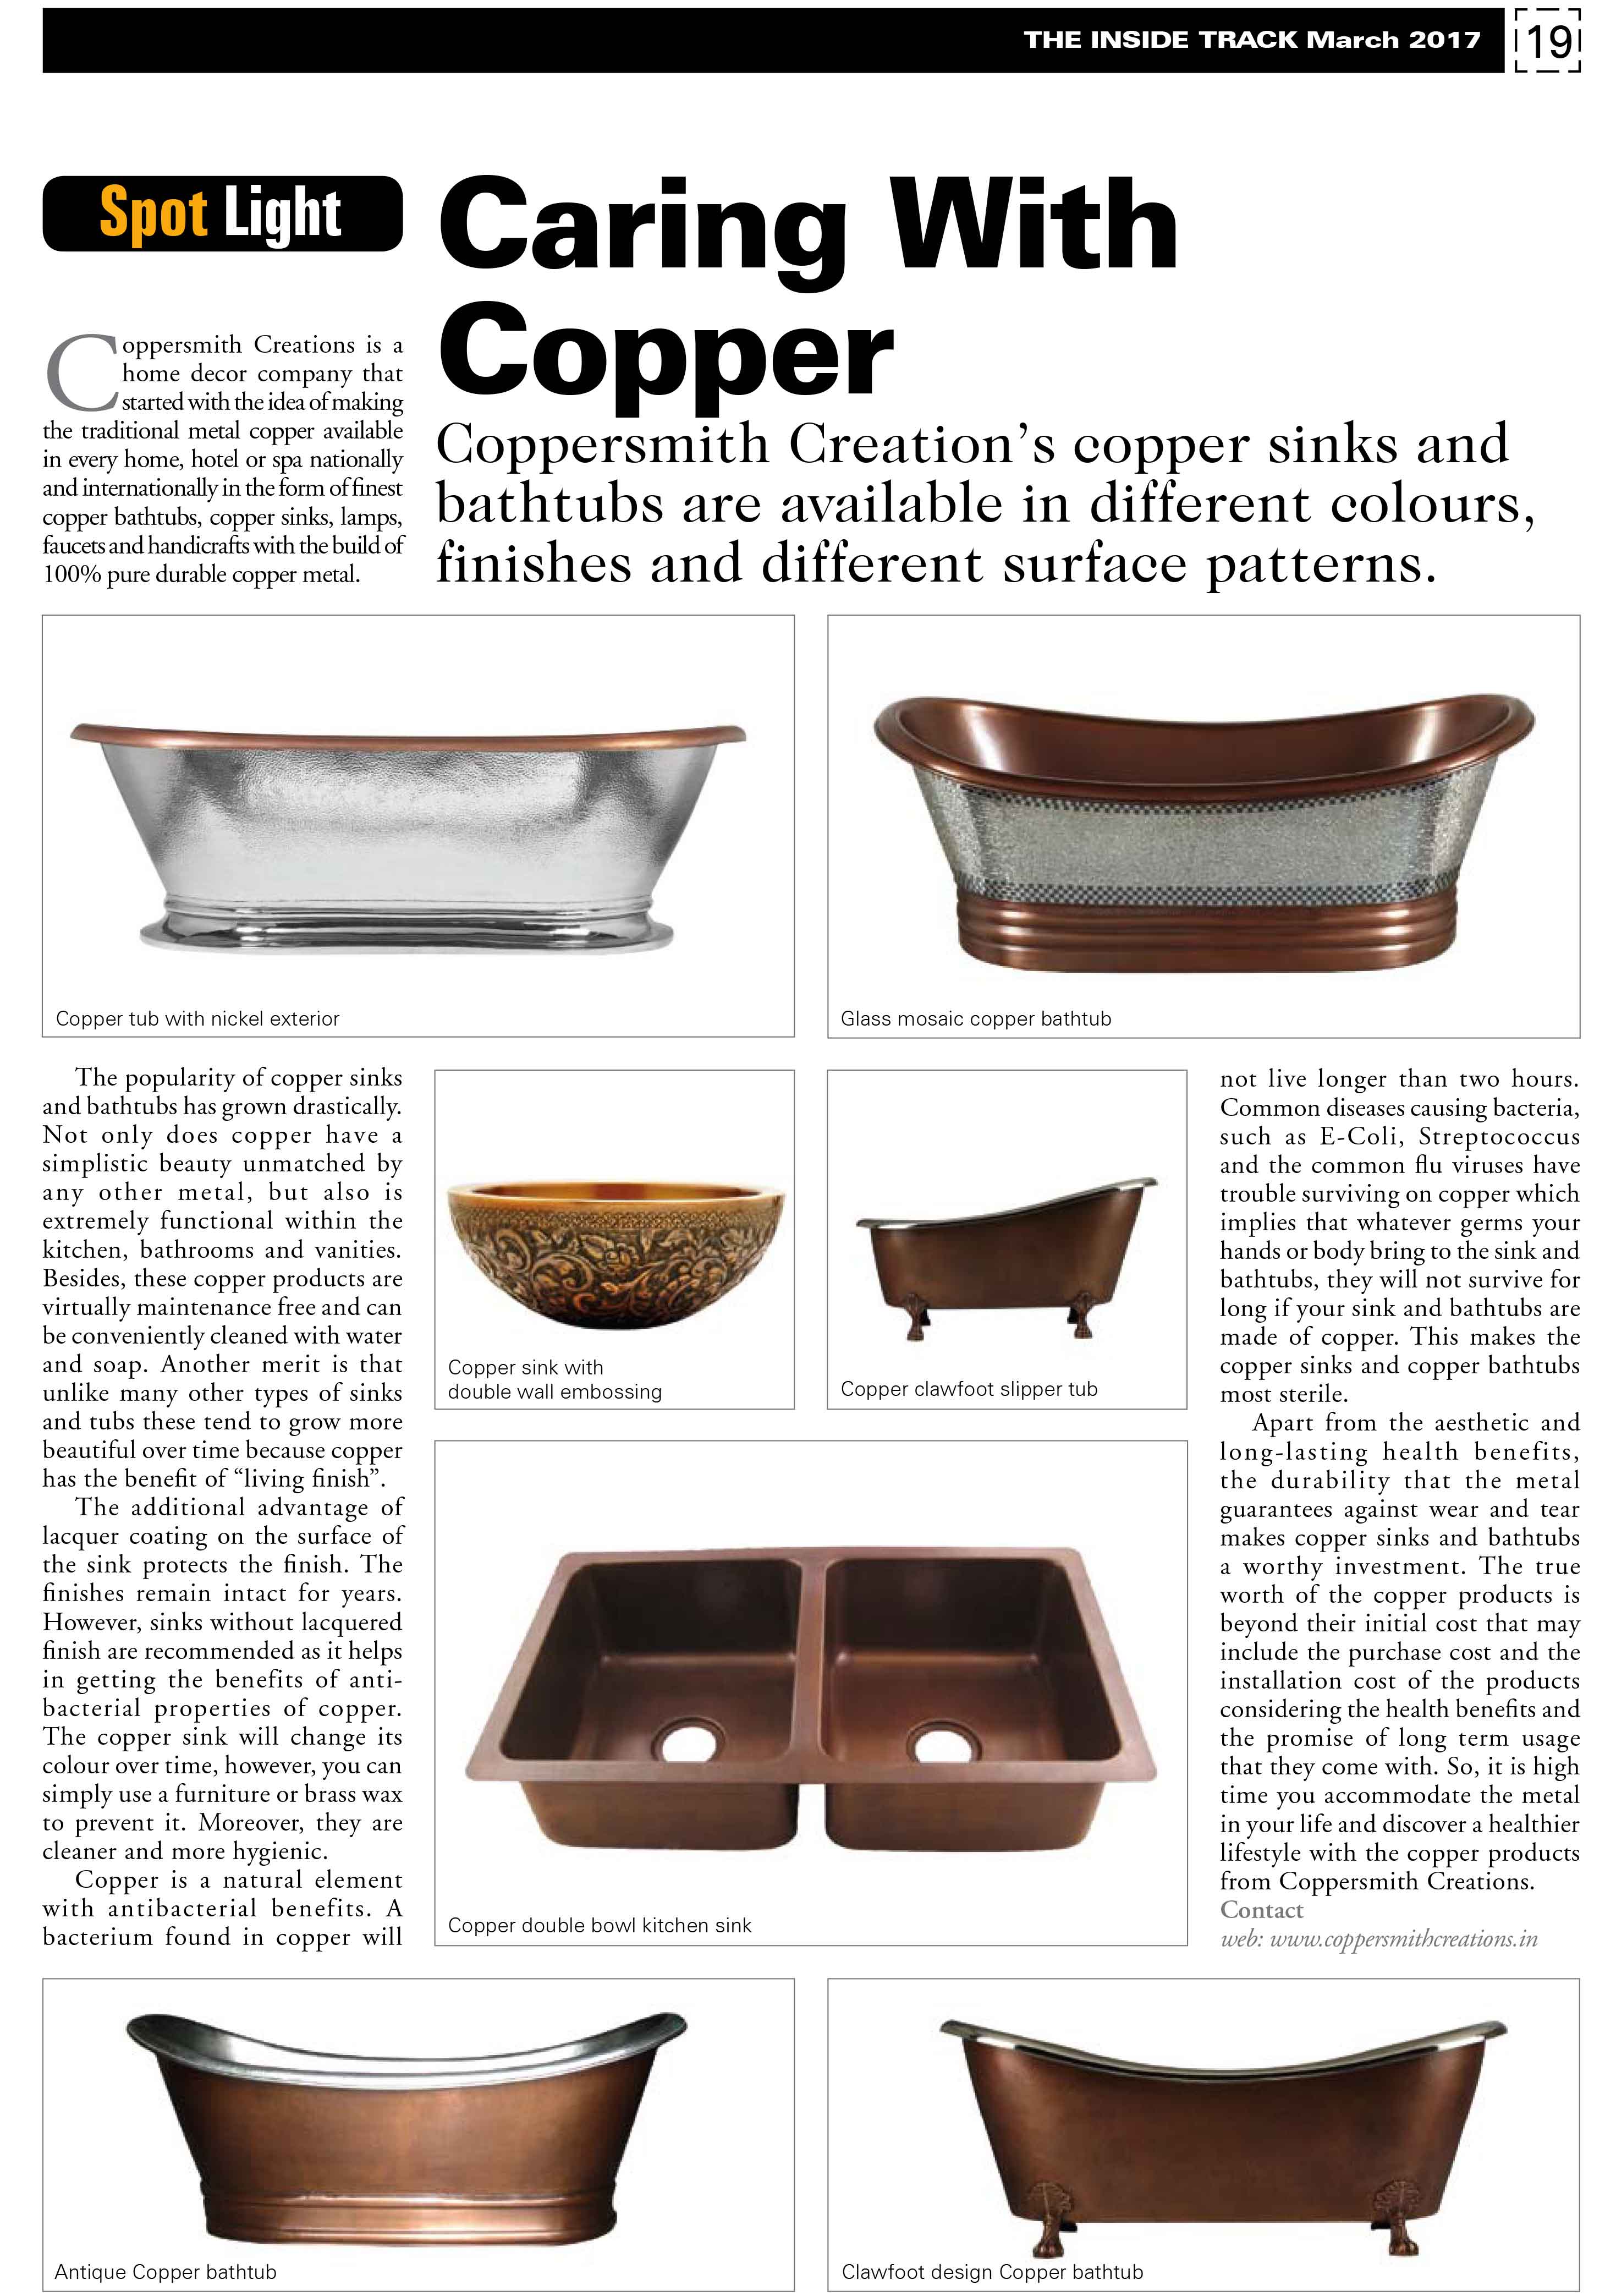 Coppersmith Creations featured in the Inside Track